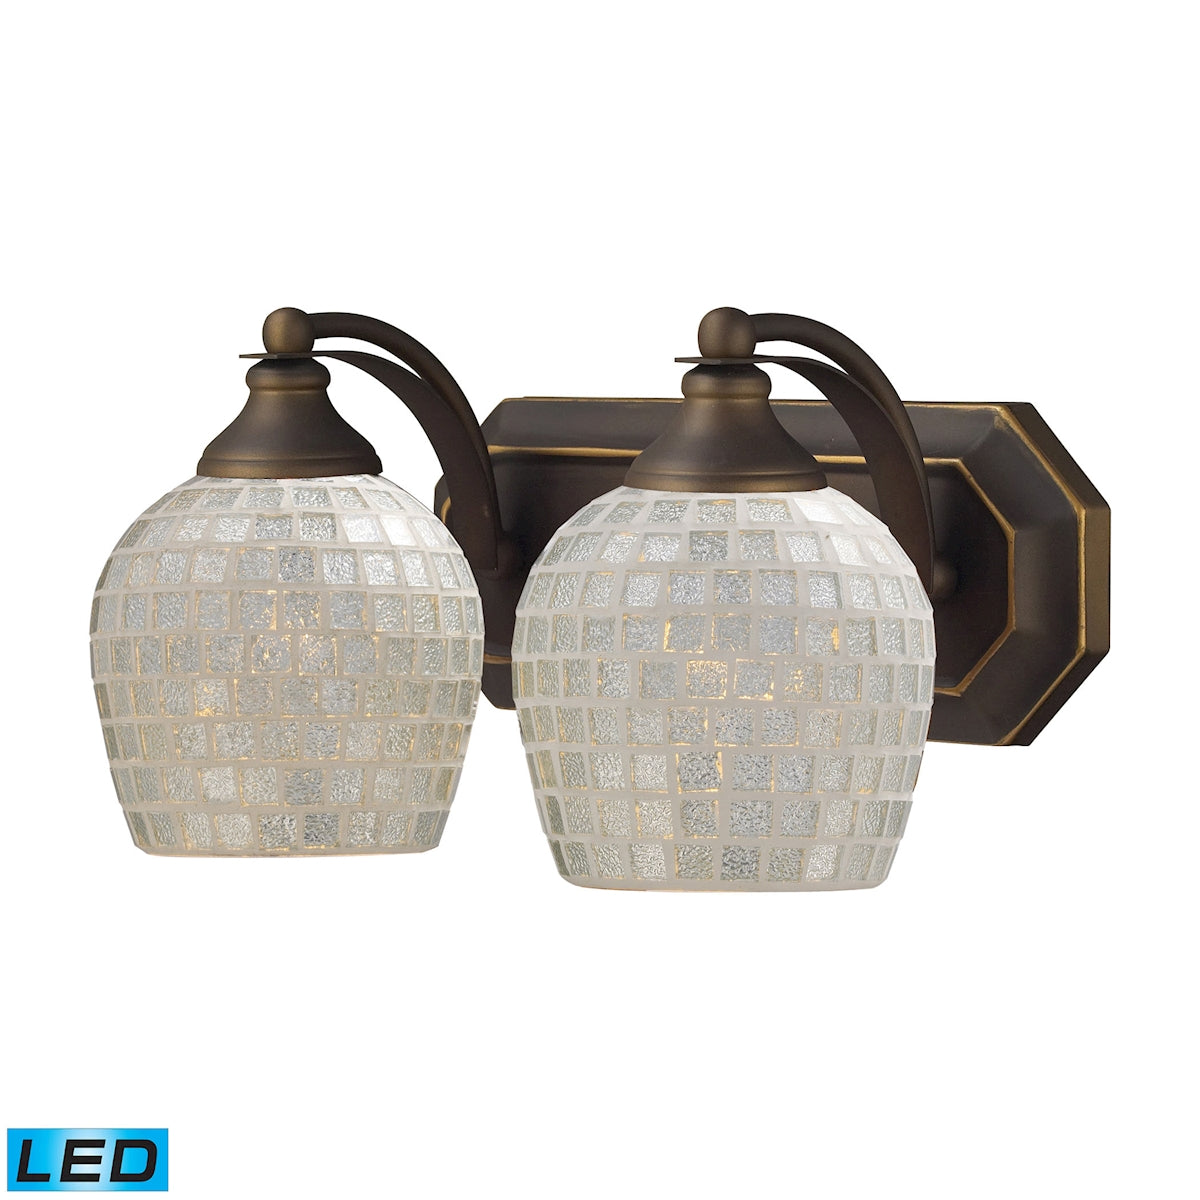 ELK Lighting 570-2B-SLV-LED Mix-N-Match Vanity 2-Light Wall Lamp in Aged Bronze with Silver Glass - Includes LED Bulbs